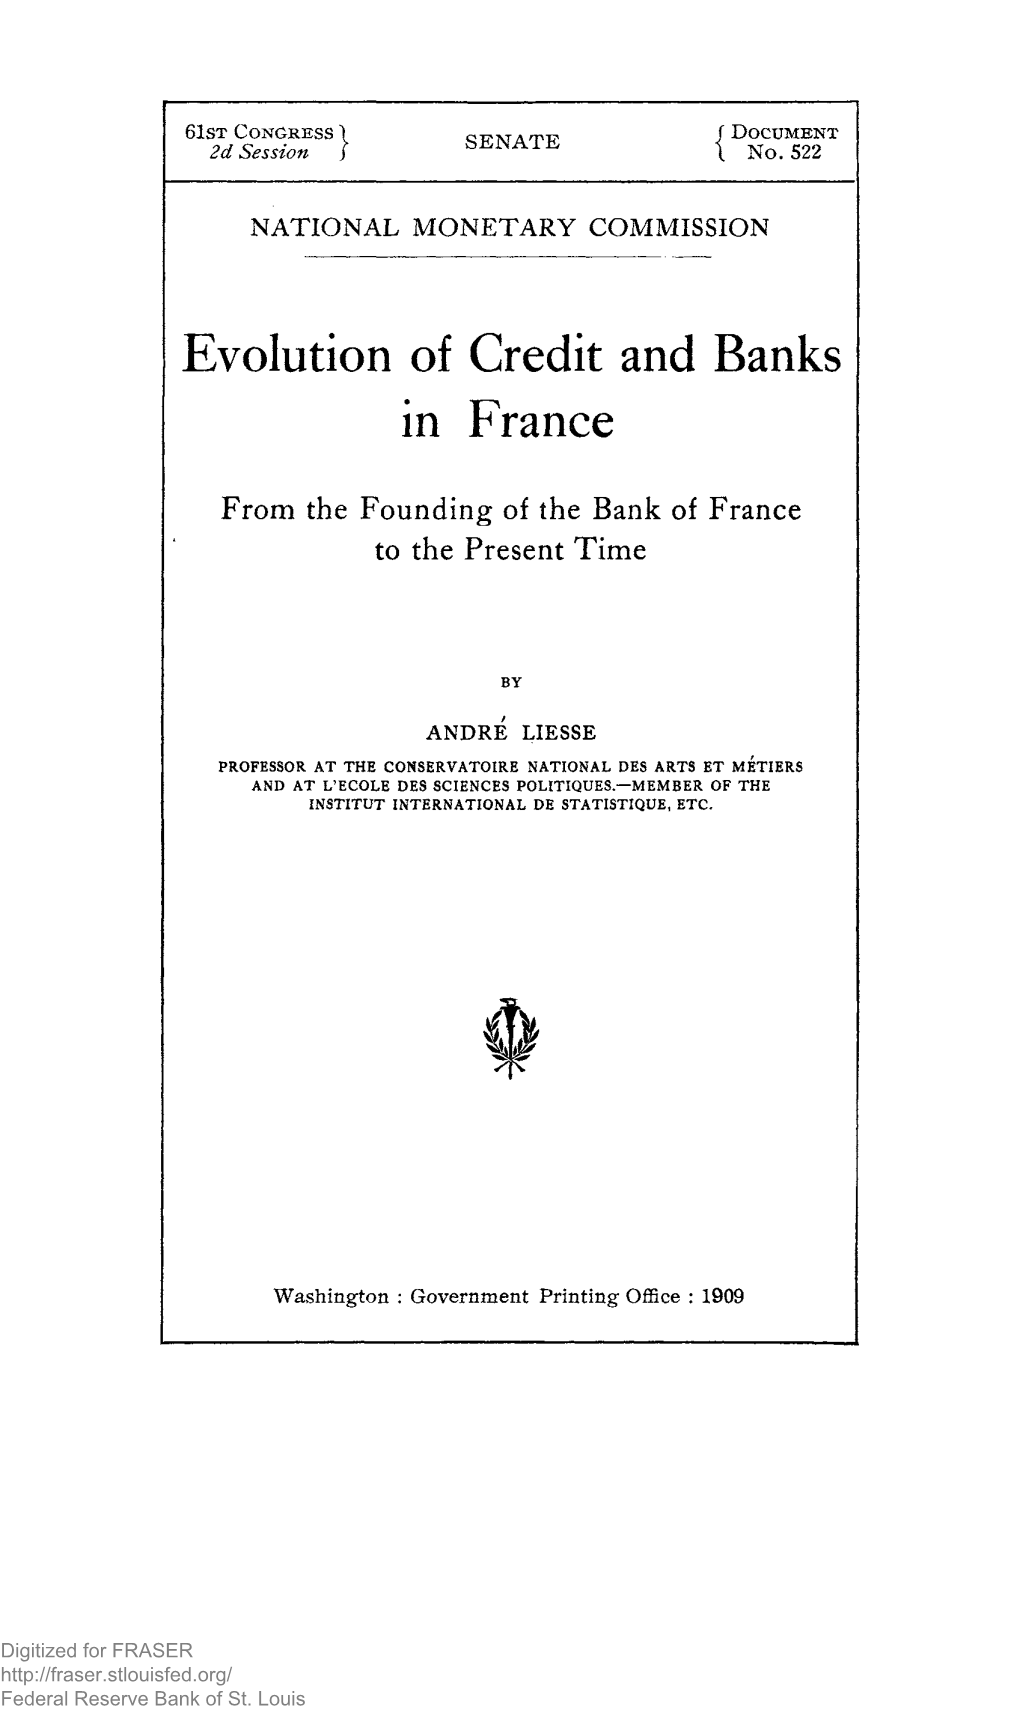 522. Evolution of Credit and Banks in France